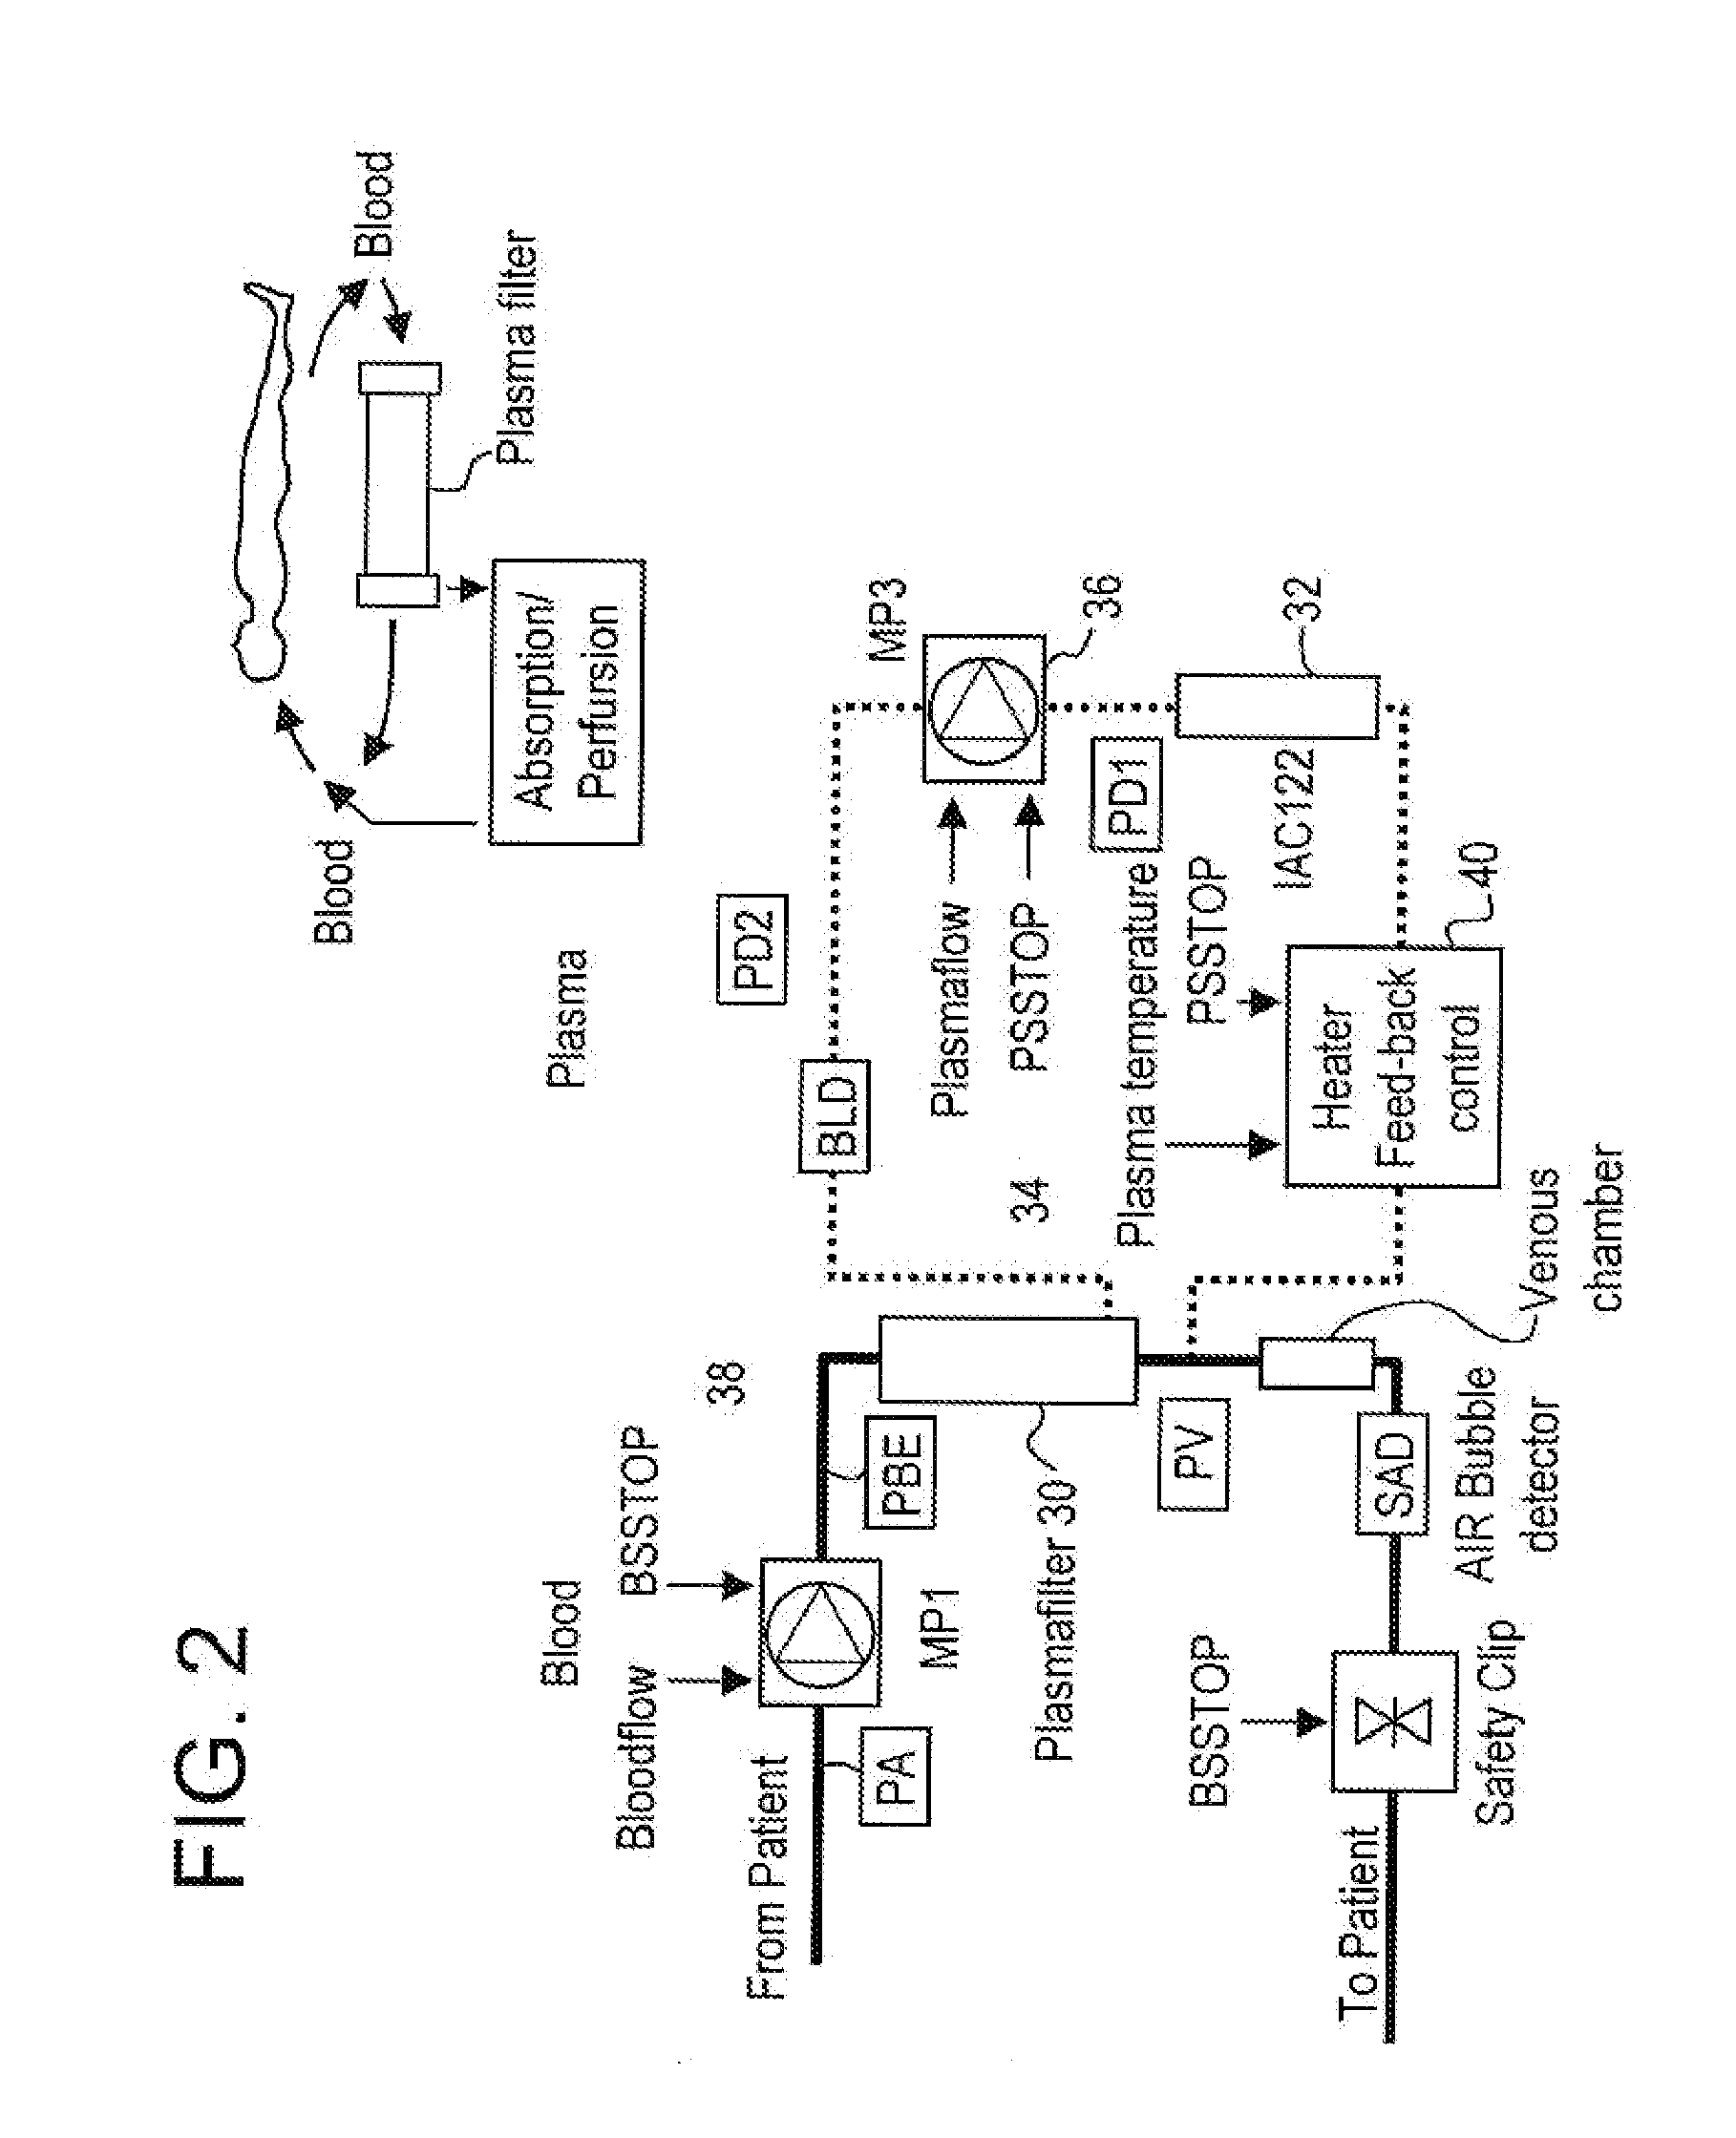 Method and system to remove soluble tnfr1, tnfr2, and il2 in patients